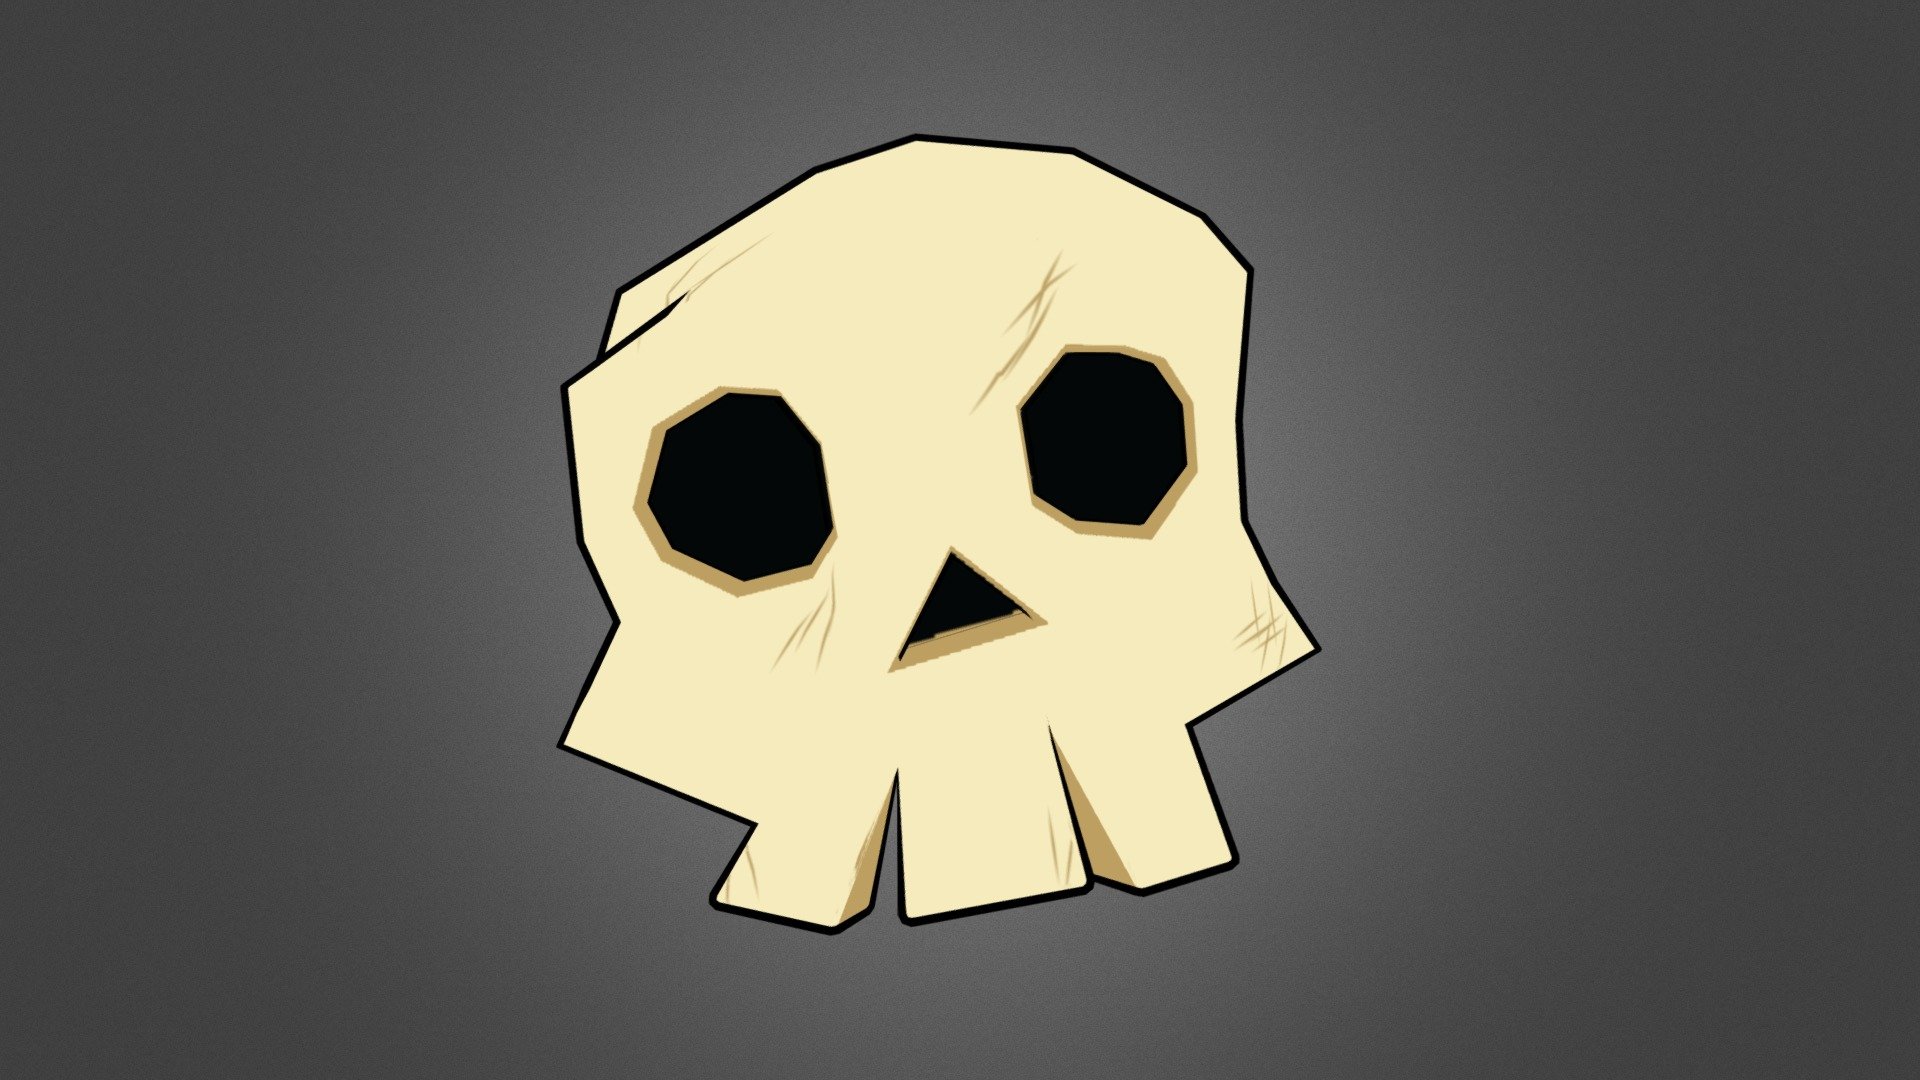 I made a Skull to celebrate Halloween 2021! 
The Skull is modeled after the skulls in Legend of Zelda Wind Waker.

Modeled in Blender and hand painted in Substance Painter.

Checkout my other work that use this model: 

Duskull - Lowpoly Cartoon Skull - Zelda Wind Waker - Download Free 3D model by Citron Legacy (@CitronLegacy) 3d model